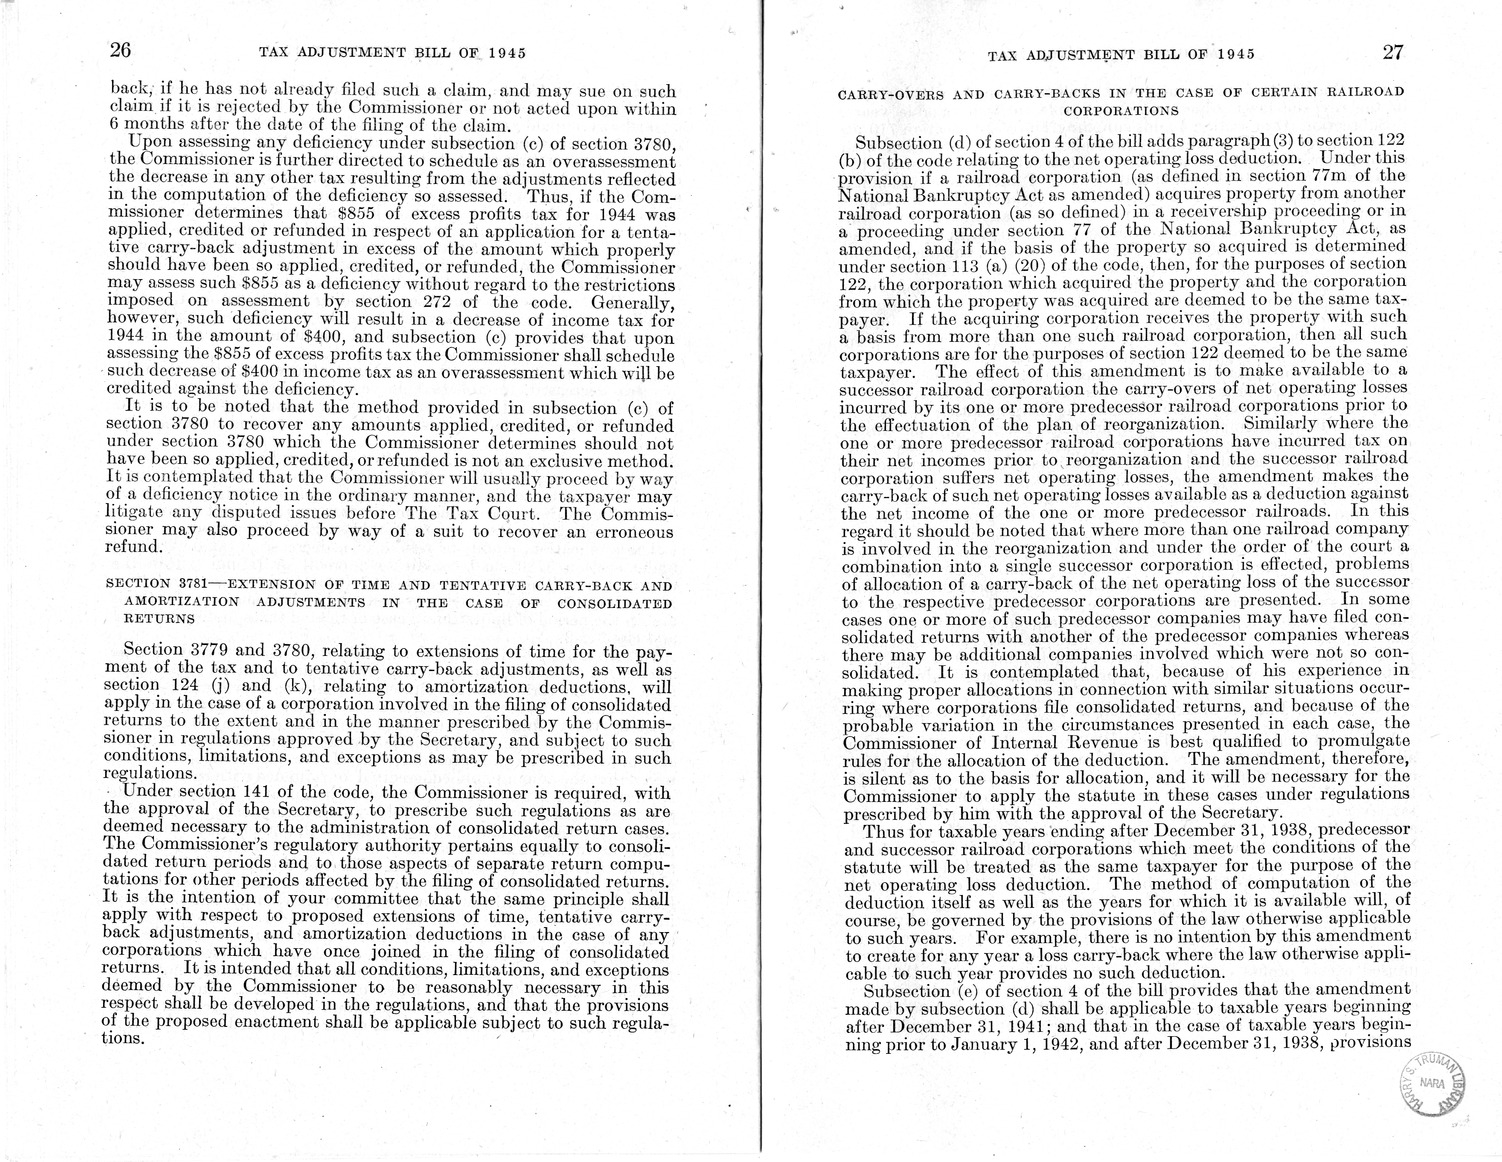 Memorandum from Harold D. Smith to M. C. Latta, H.R. 3633, to Facilitate Reconversion, and for Other Purposes, with Attachments